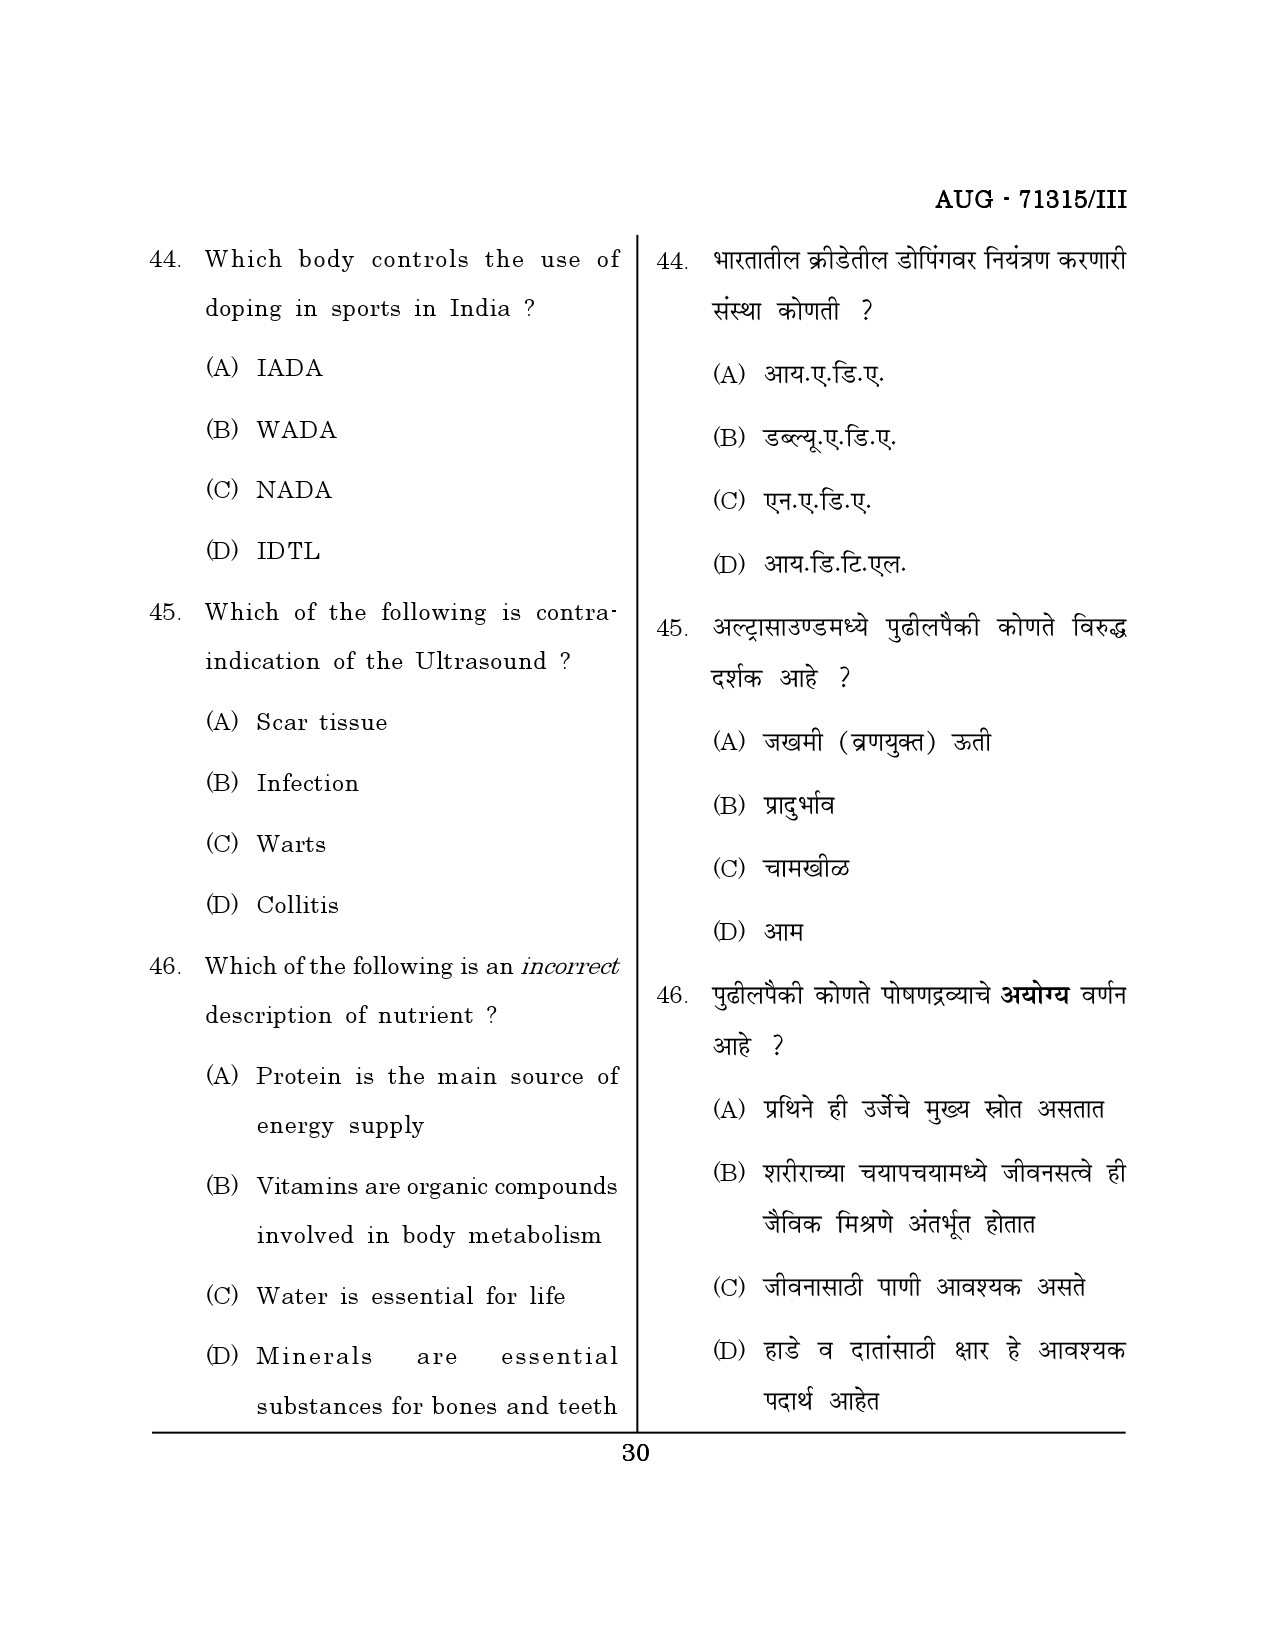 Maharashtra SET Physical Education Question Paper III August 2015 29